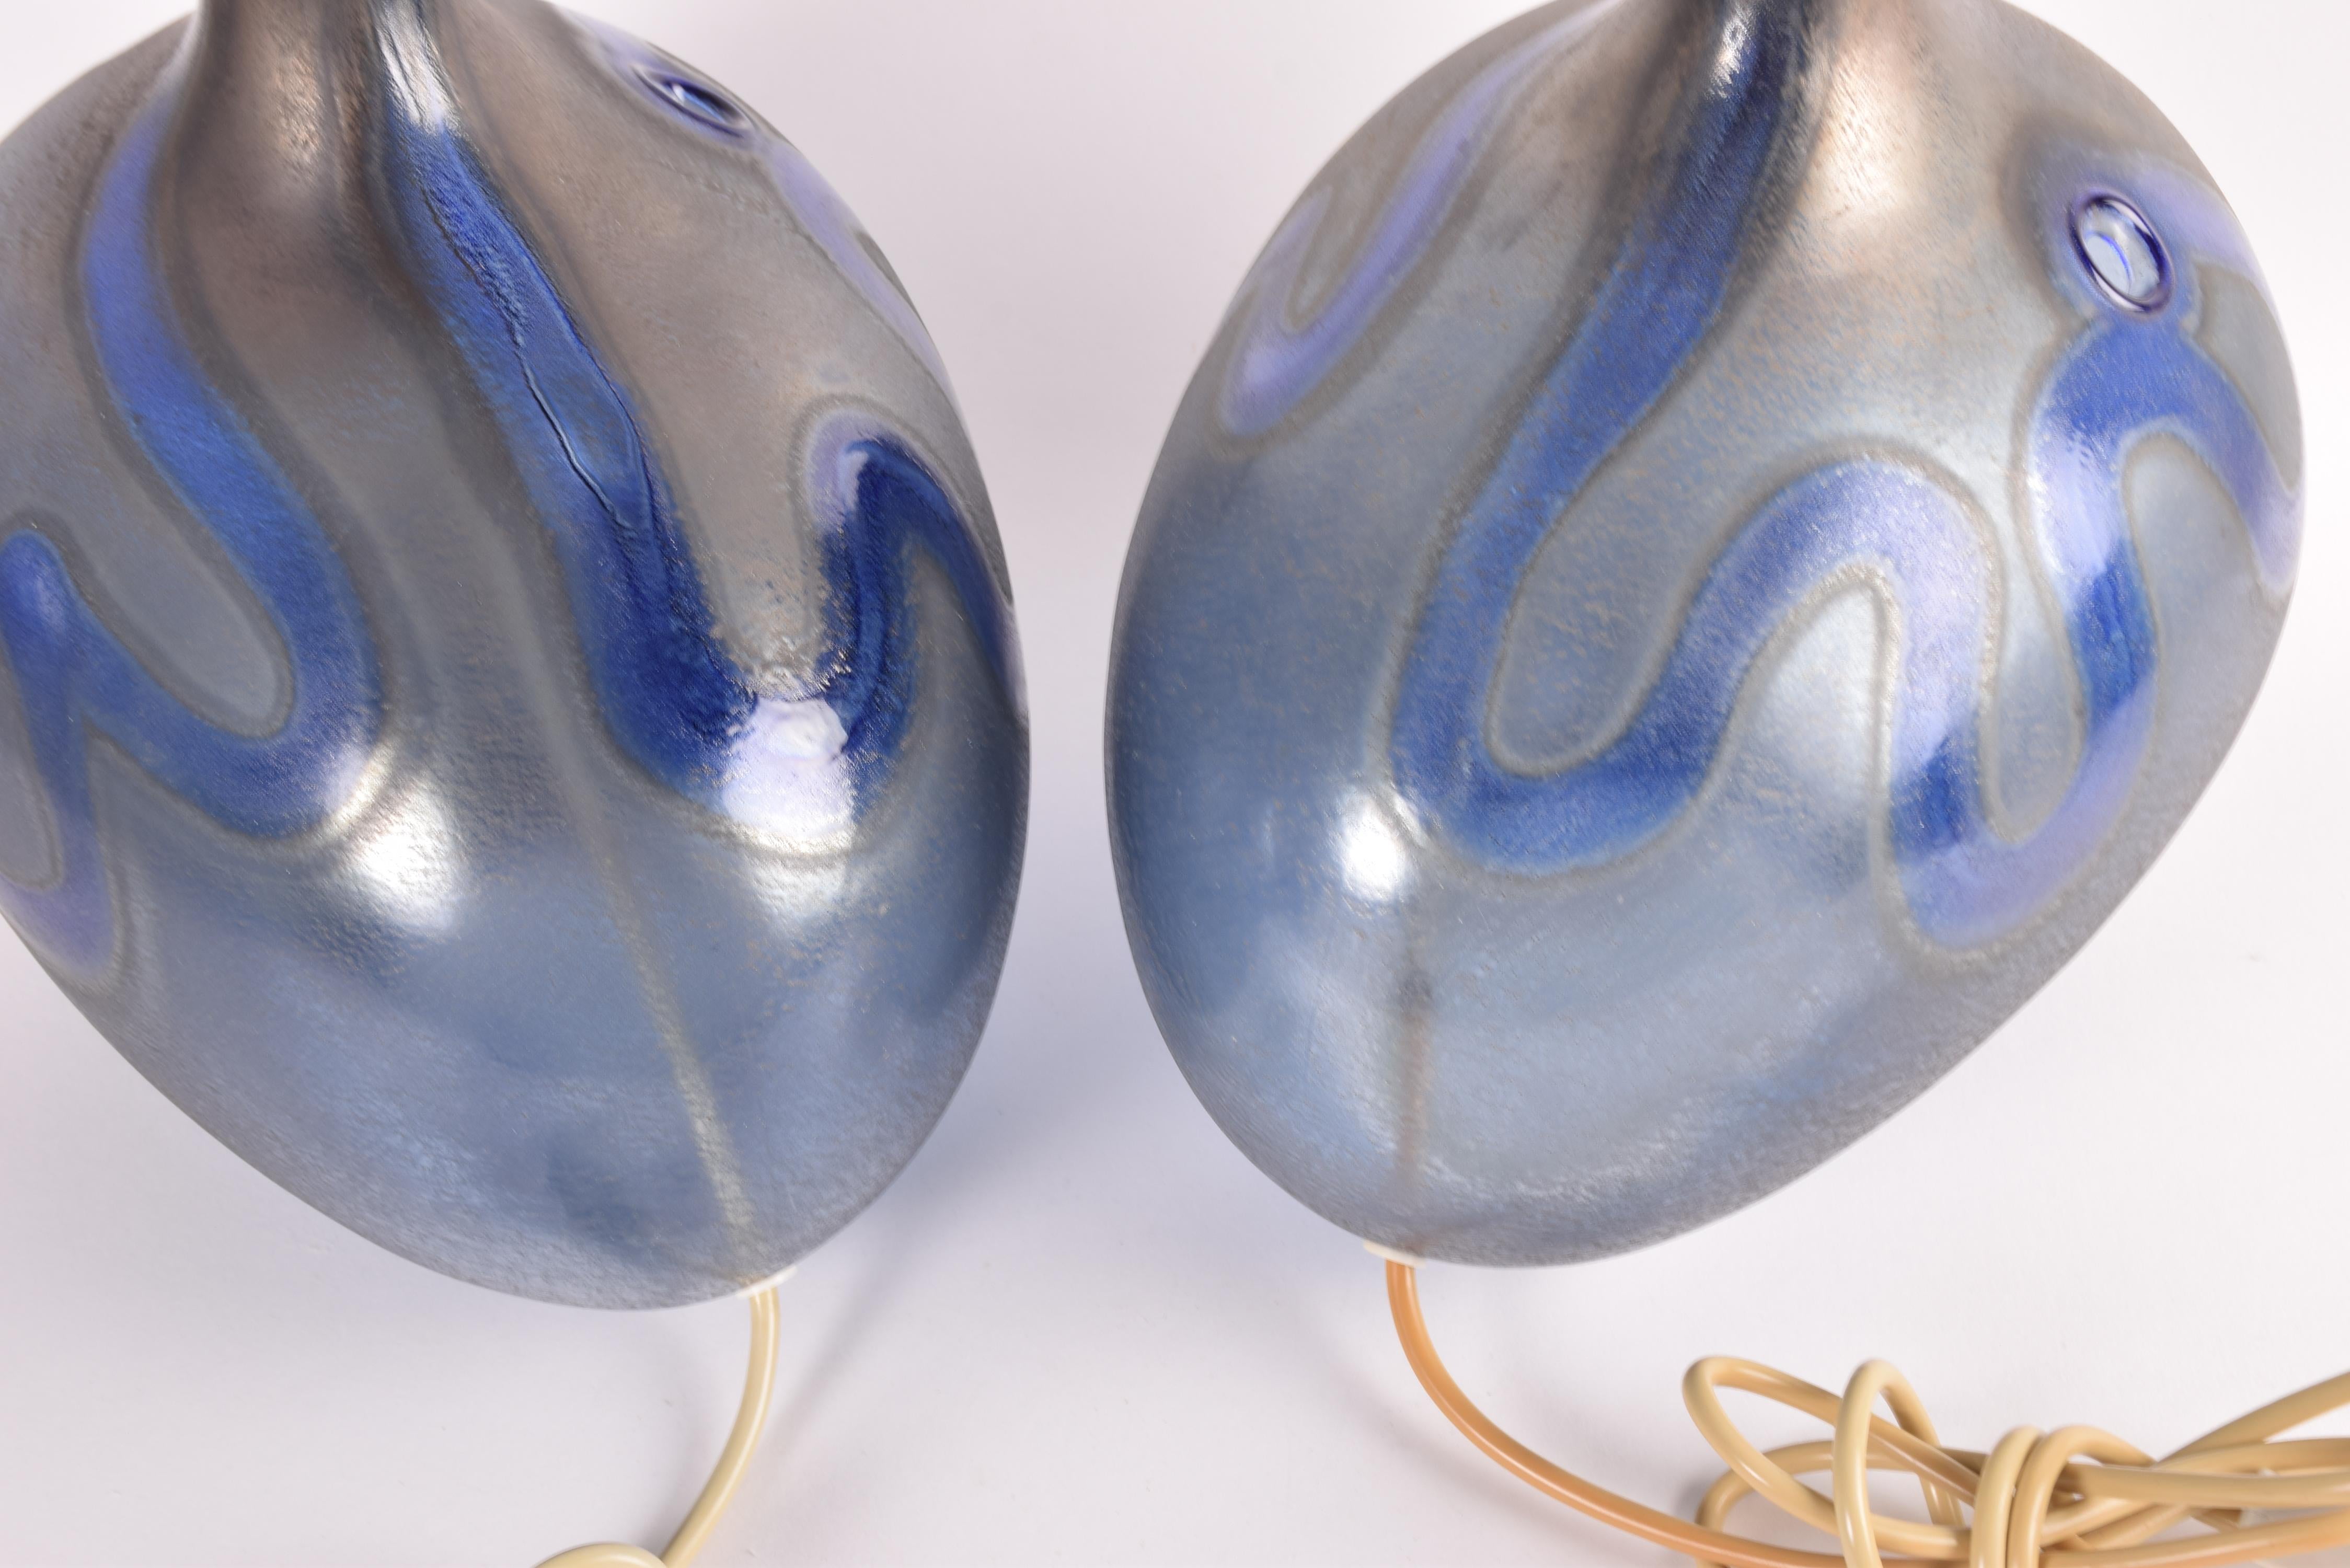 Pair of Large Holmegaard Lamp Art Blue Sculptural Glass Table Lamps Danish 1970s For Sale 2